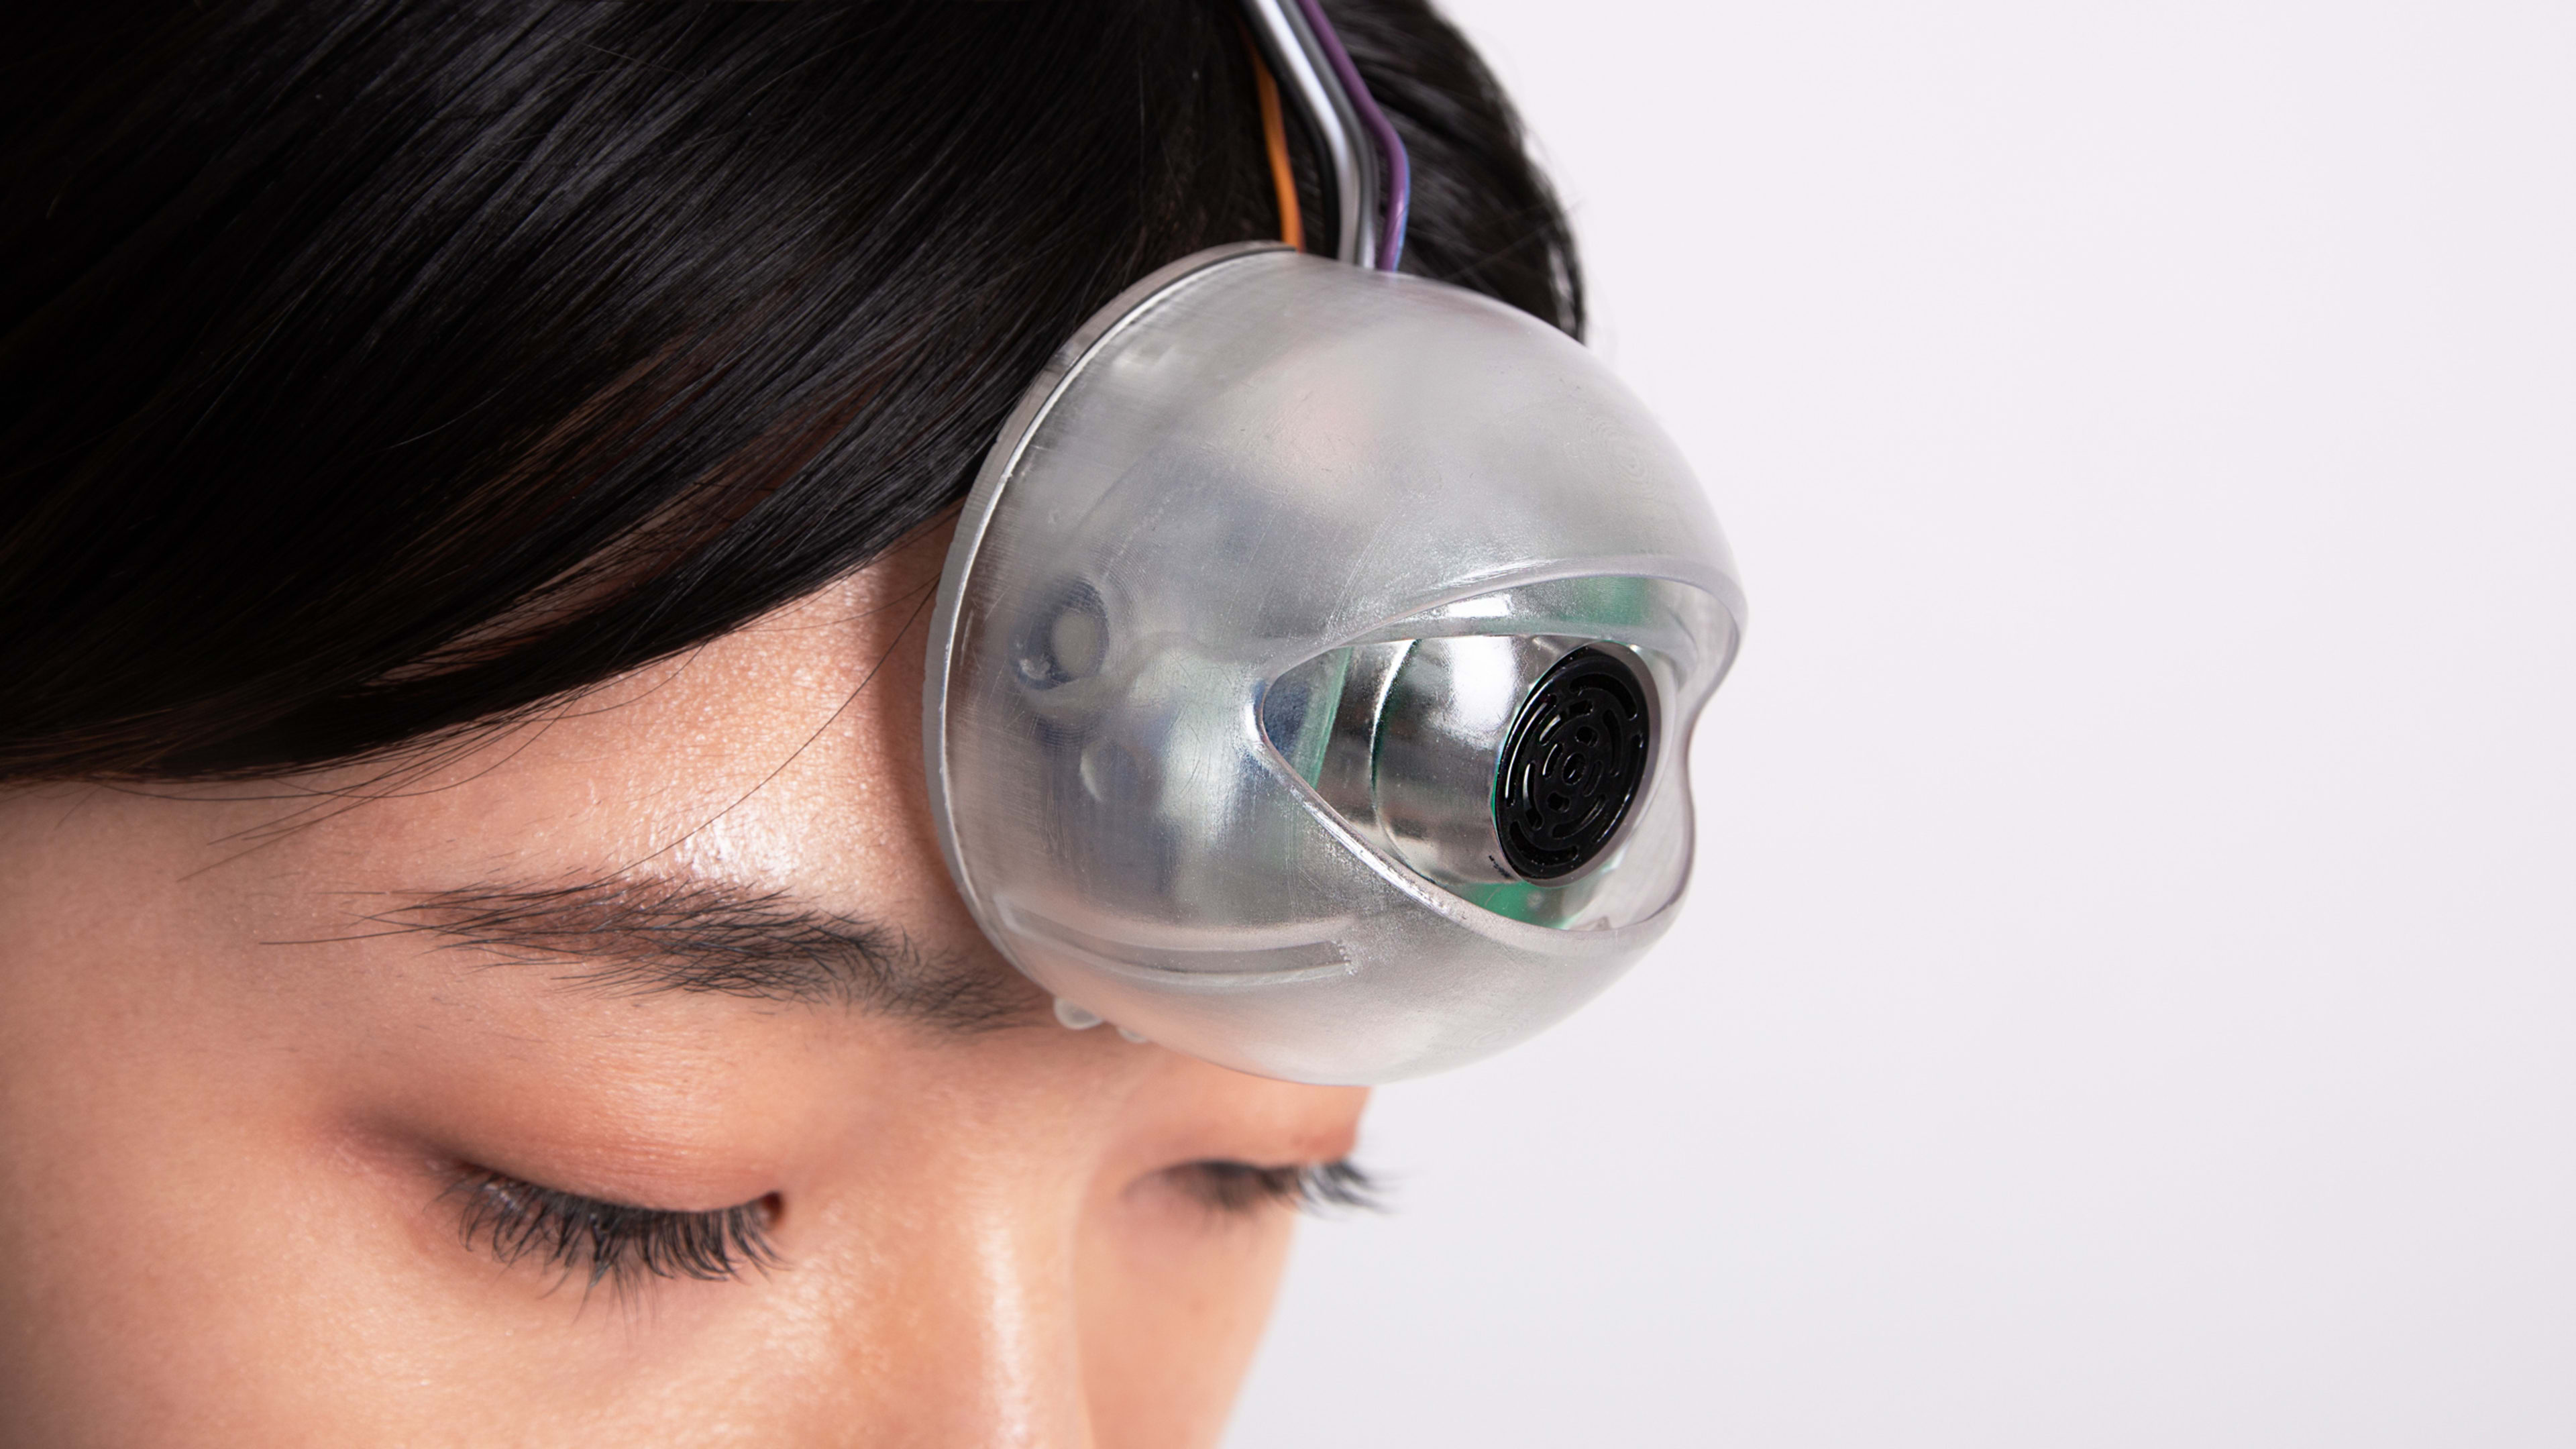 Never faceplant again staring at your phone, thanks to this robotic third eye